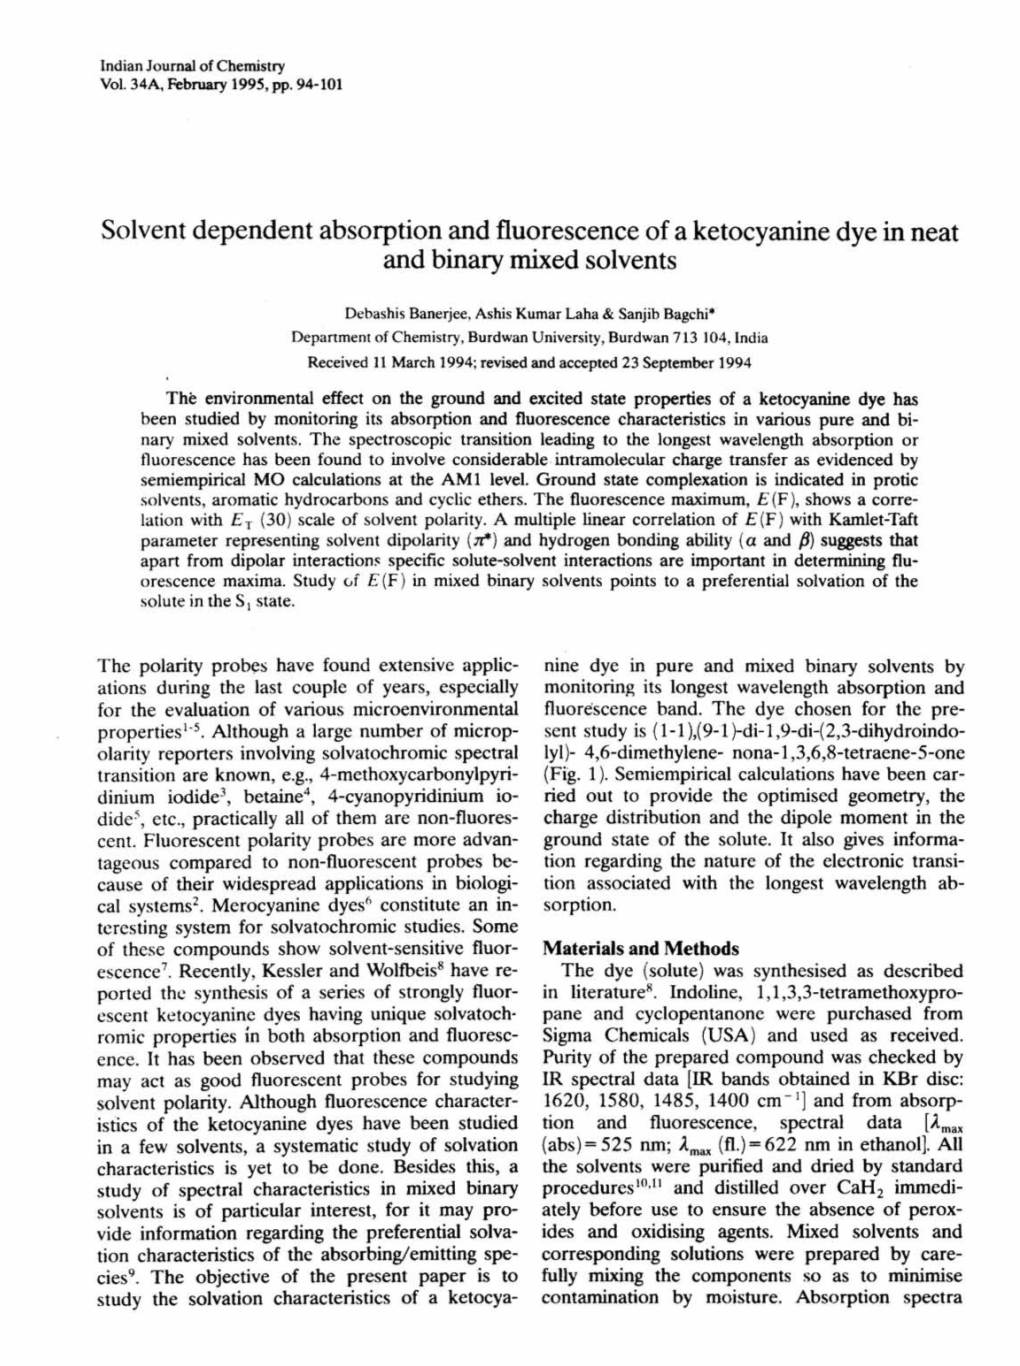 Solvent Dependent Absorption and Fluorescence Ofaketocyanine Dye